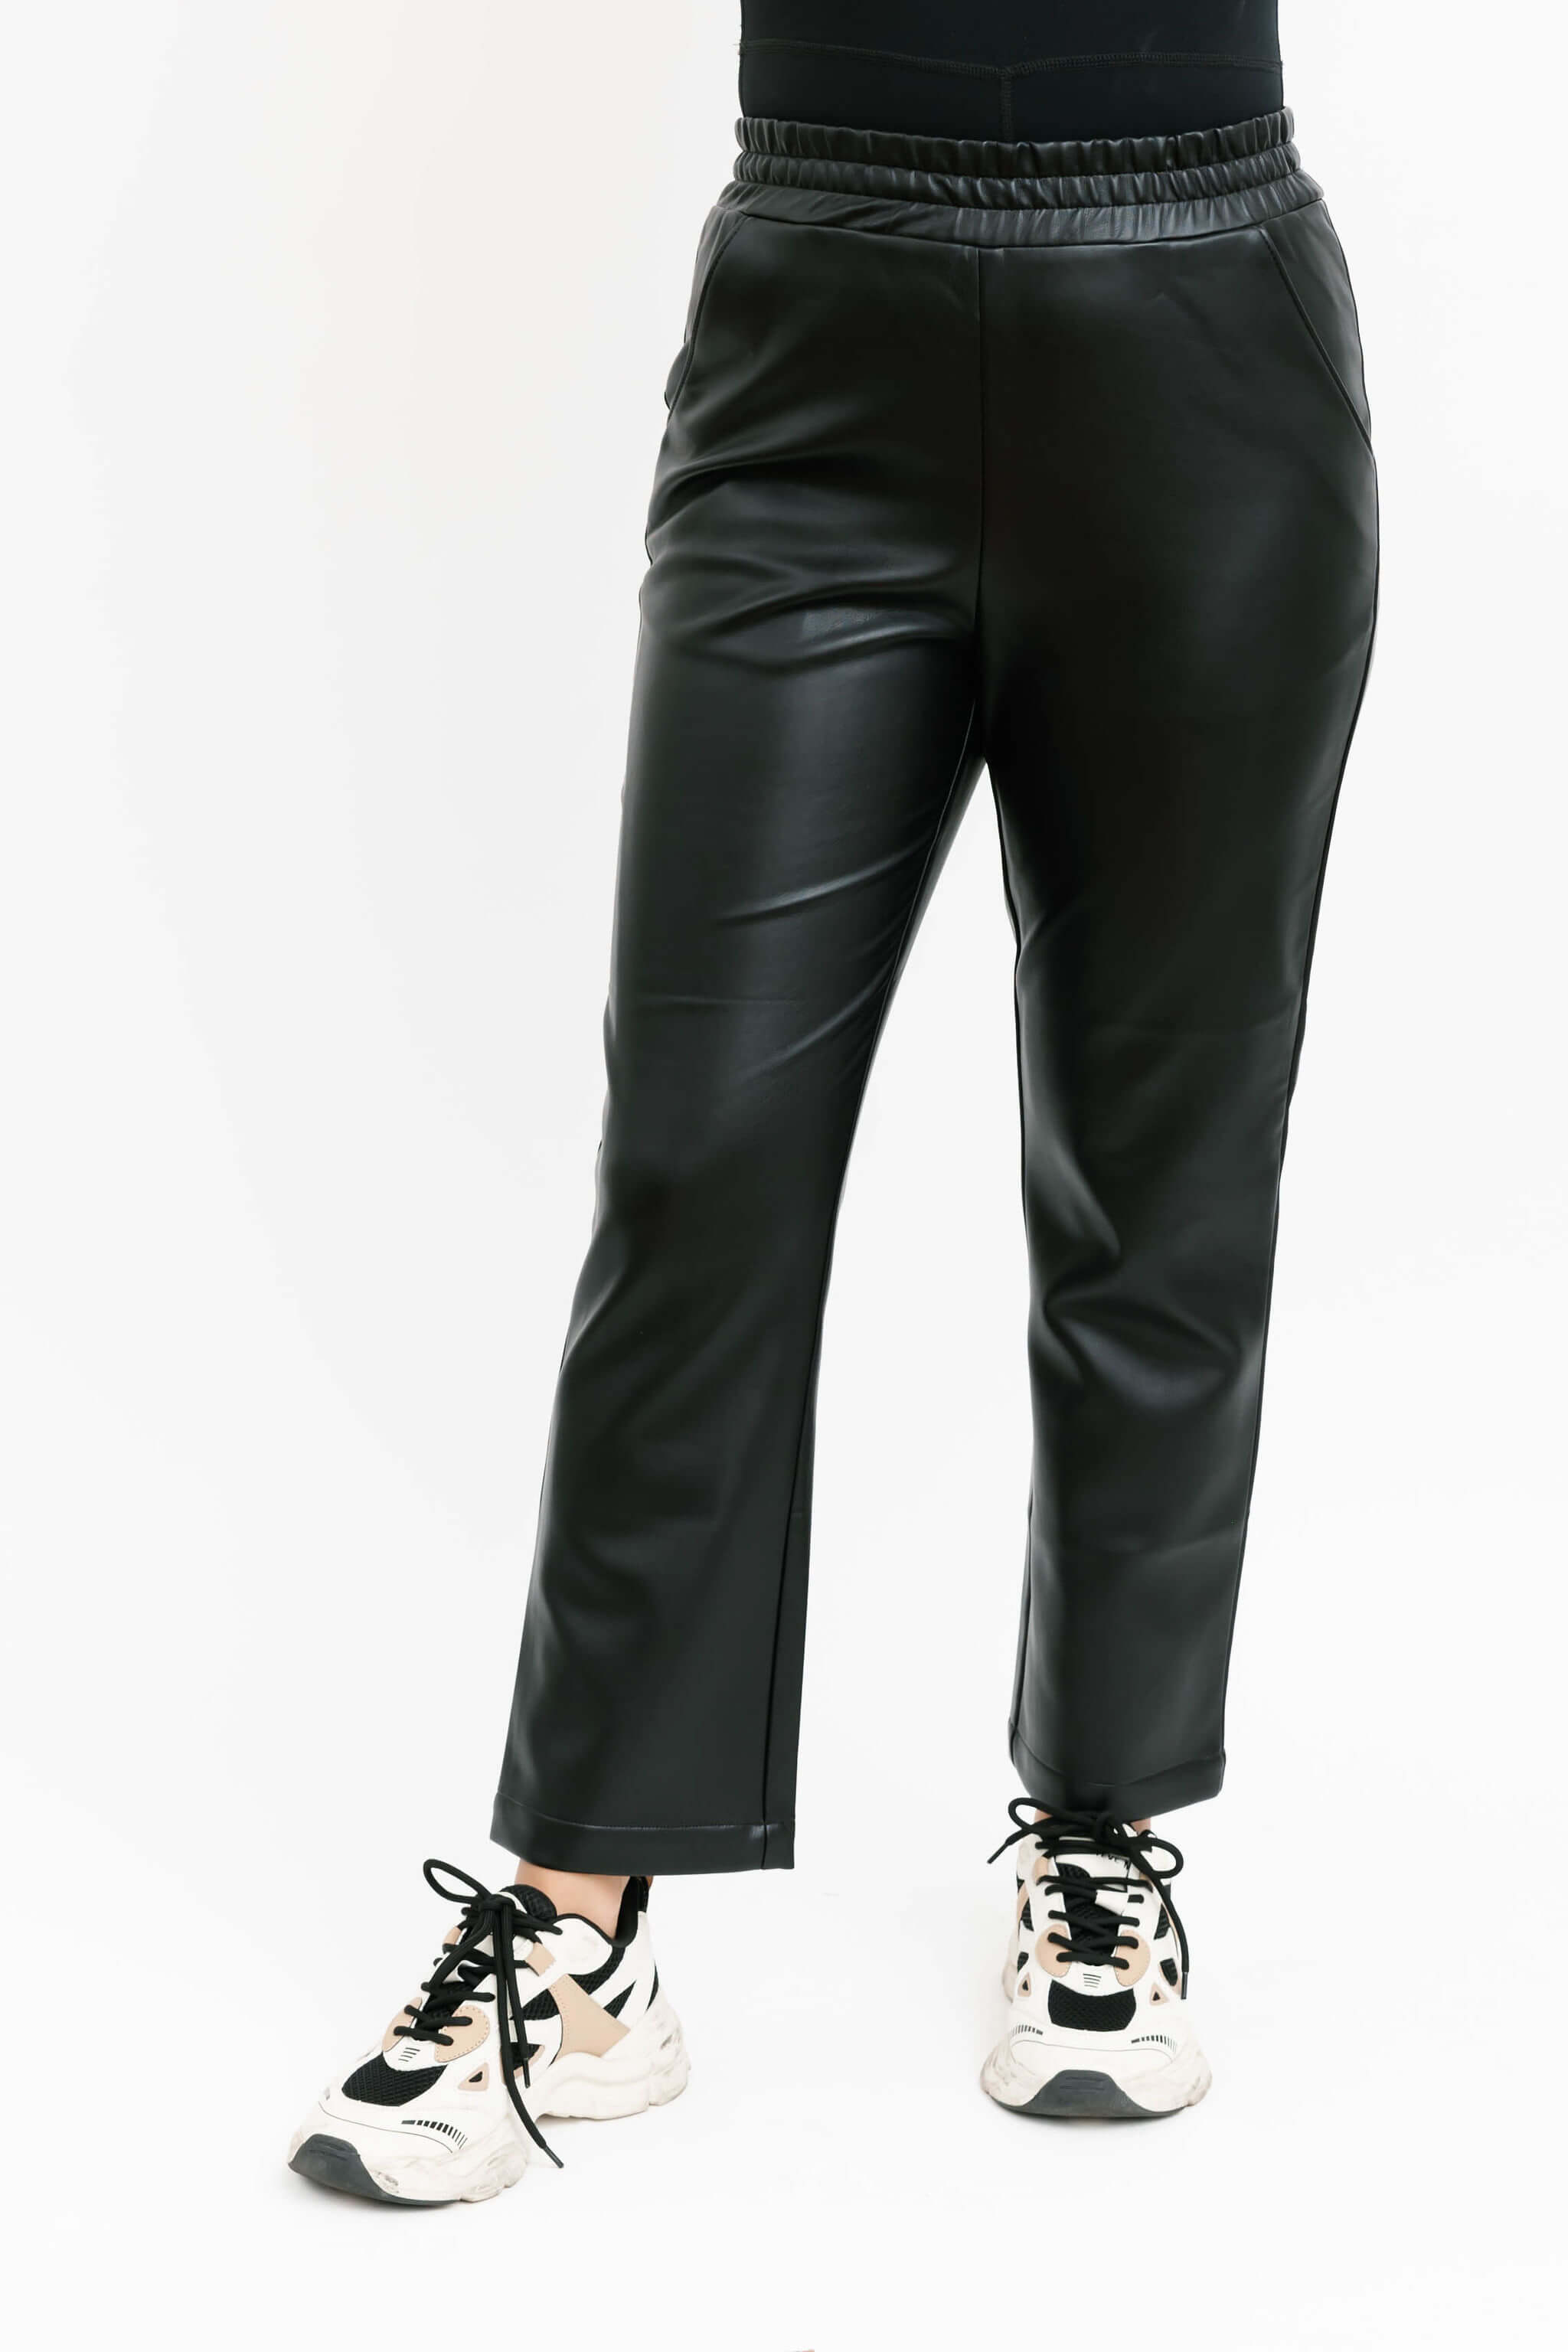 High Waist Wide Leg Faux Leather Trousers, Leggings for Women, Faux Leather  Leggings Trousers, Black Leggins, Christmas Gift, Gift for Her -  Norway